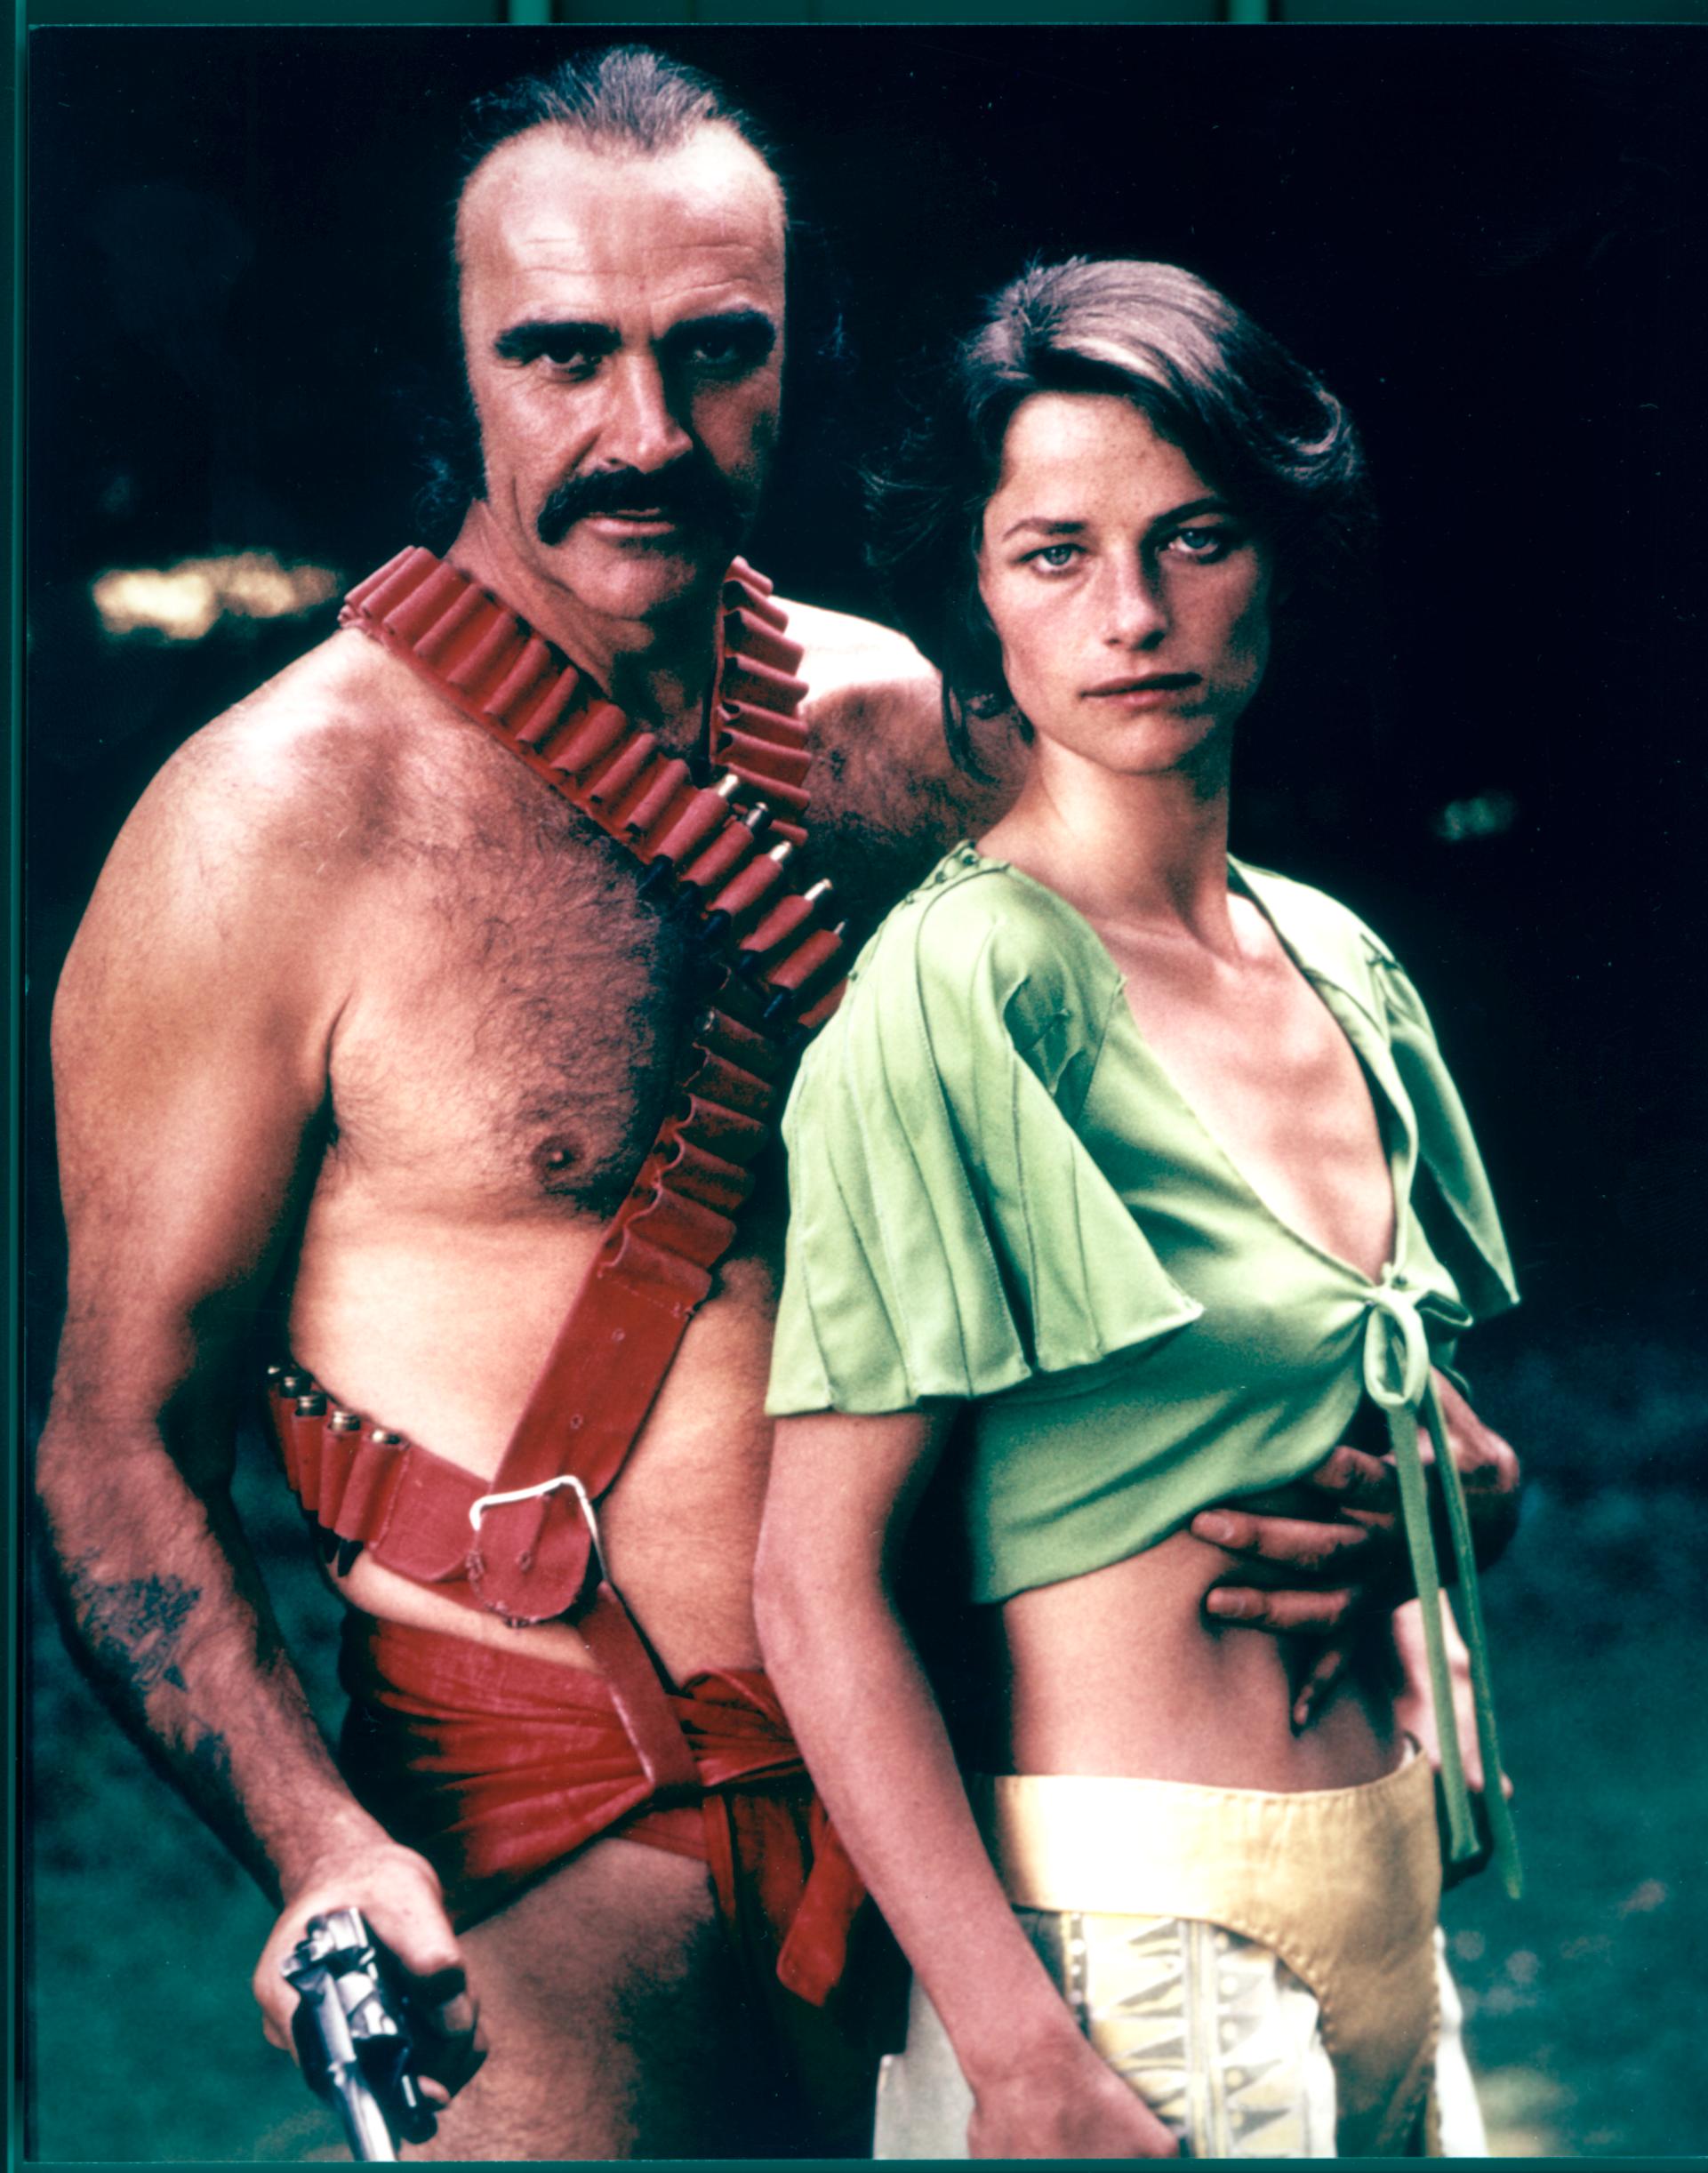 Still of Sean Connery and Charlotte Rampling in Zardoz (1974)